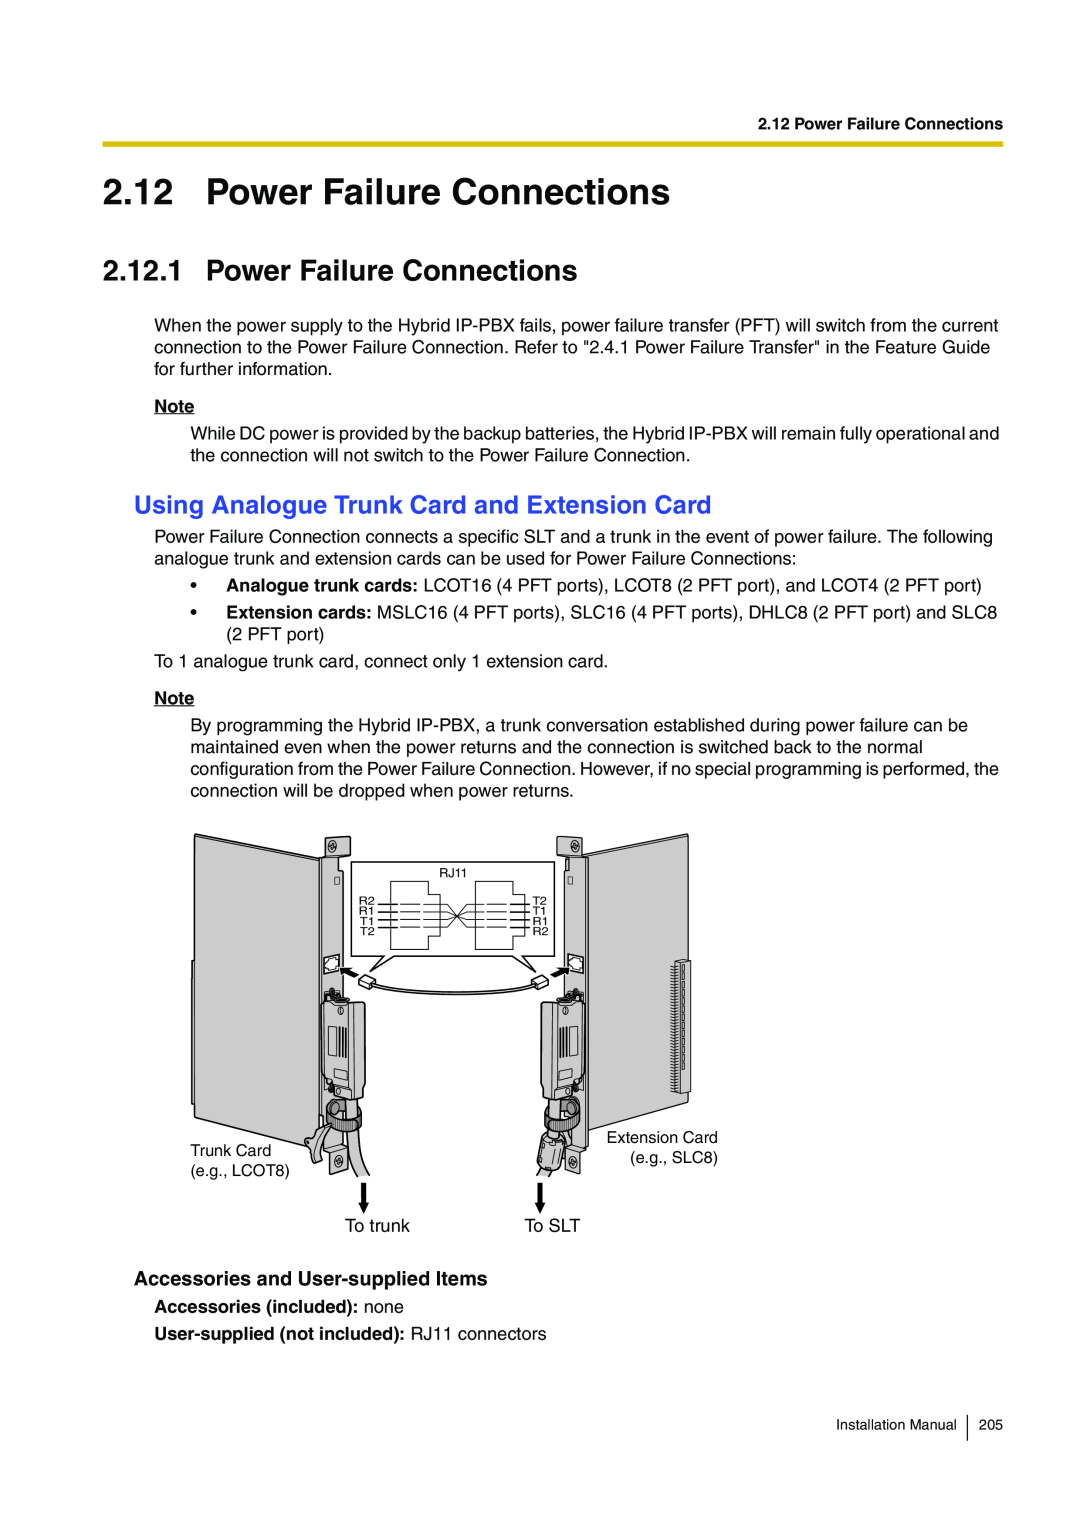 Panasonic KX-TDA100 installation manual Power Failure Connections, Using Analogue Trunk Card and Extension Card 